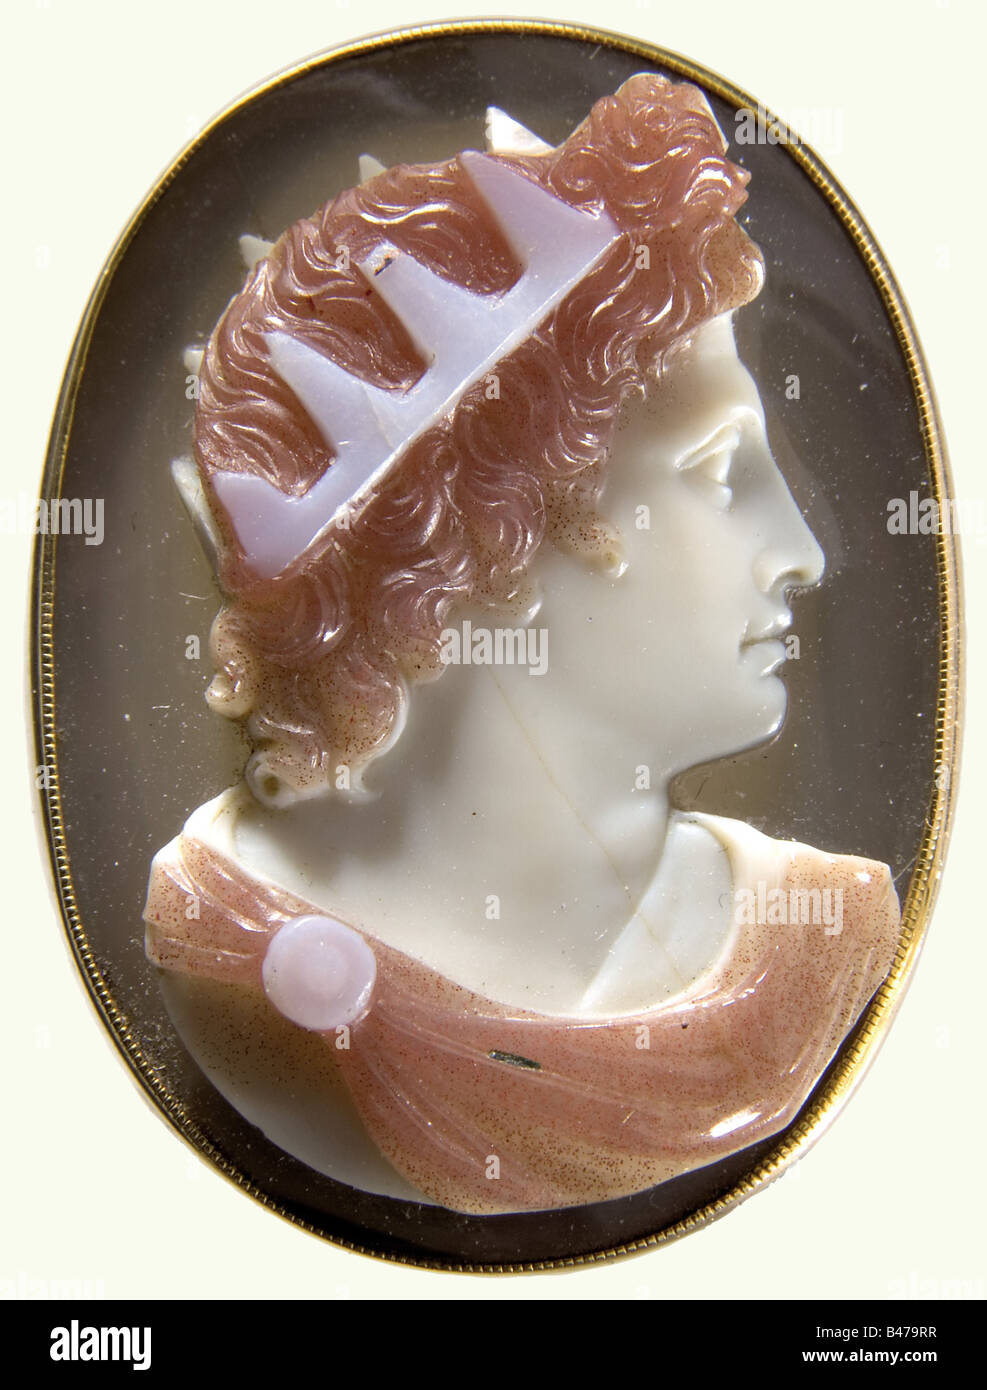 An Italian gold ring with a cameo, 1st quarter of the 19th century. A multi-coloured agate cameo deeply cut with a sculpted antique-style portrait of a monarch. Some of the points of the crown are damaged. Yellow gold setting with openwork floral decoration at the base and a heavy band. Size of the cameo 30 x 23 mm. Ring diameter ca. 22 mm. fine arts, people, 19th century, handicrafts, handcraft, craft, object, objects, stills, clipping, clippings, cut out, cut-out, cut-outs, jewellery, jewelry, noble, precious, Artist's Copyright has not to be cleared Stock Photo